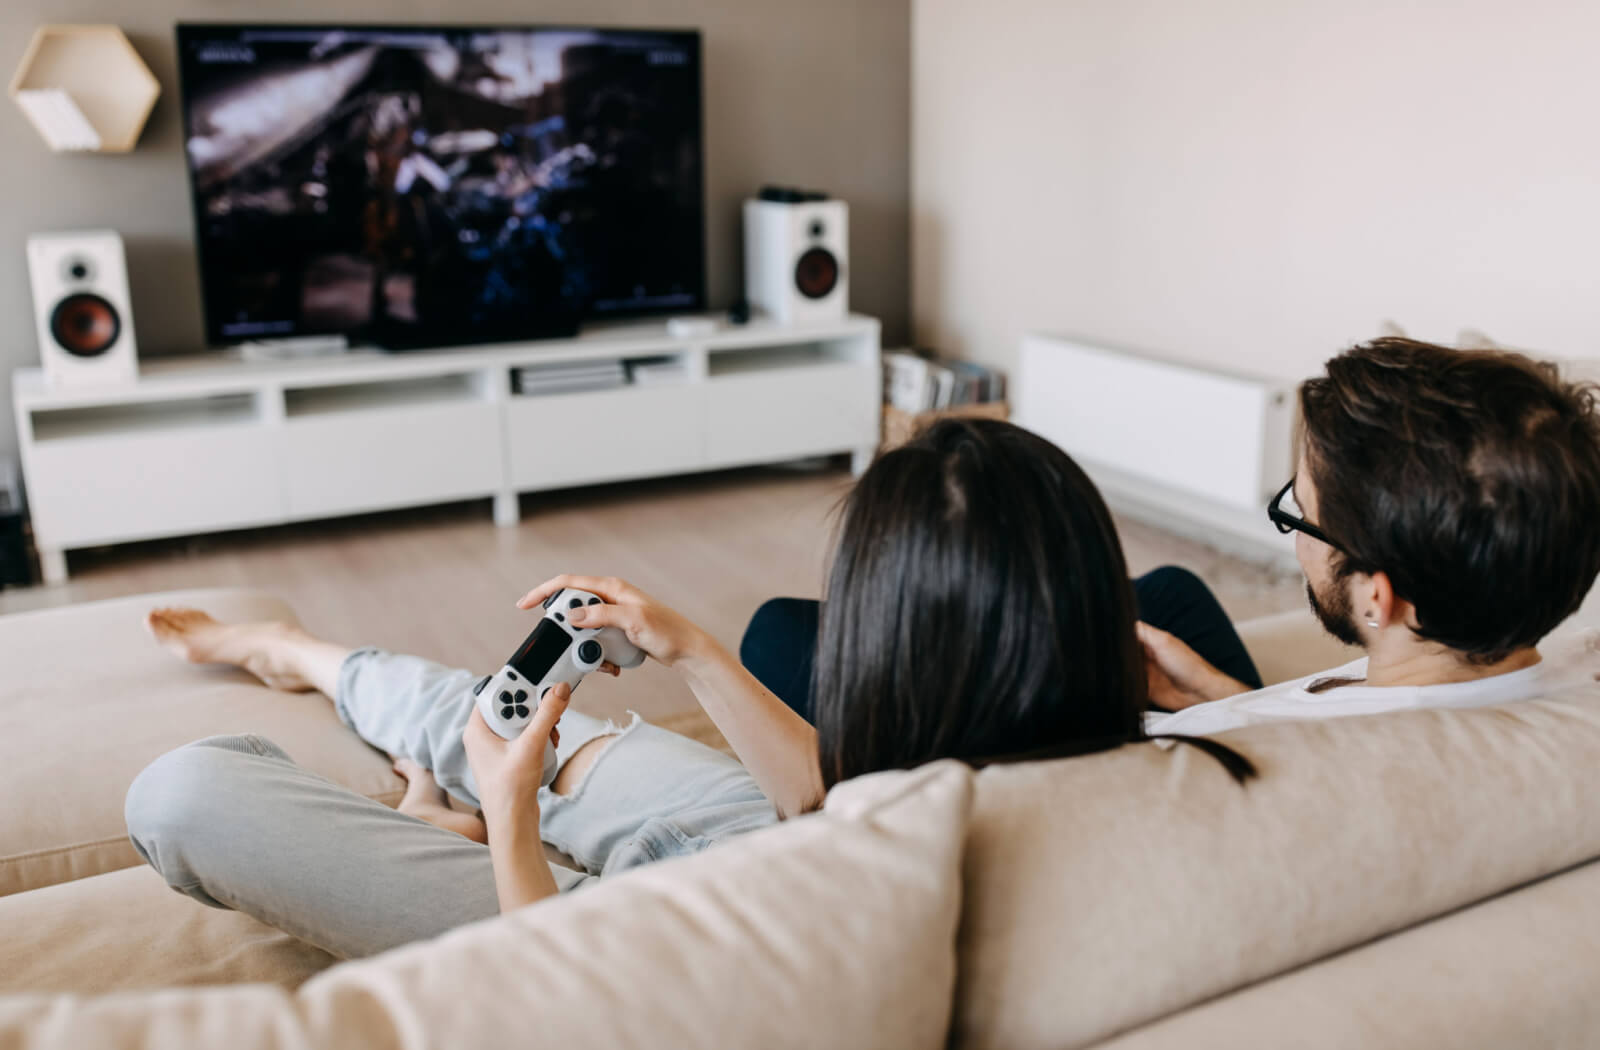 A man and a woman sitting on a couch playing video games and looking into a TV screen at the same time.